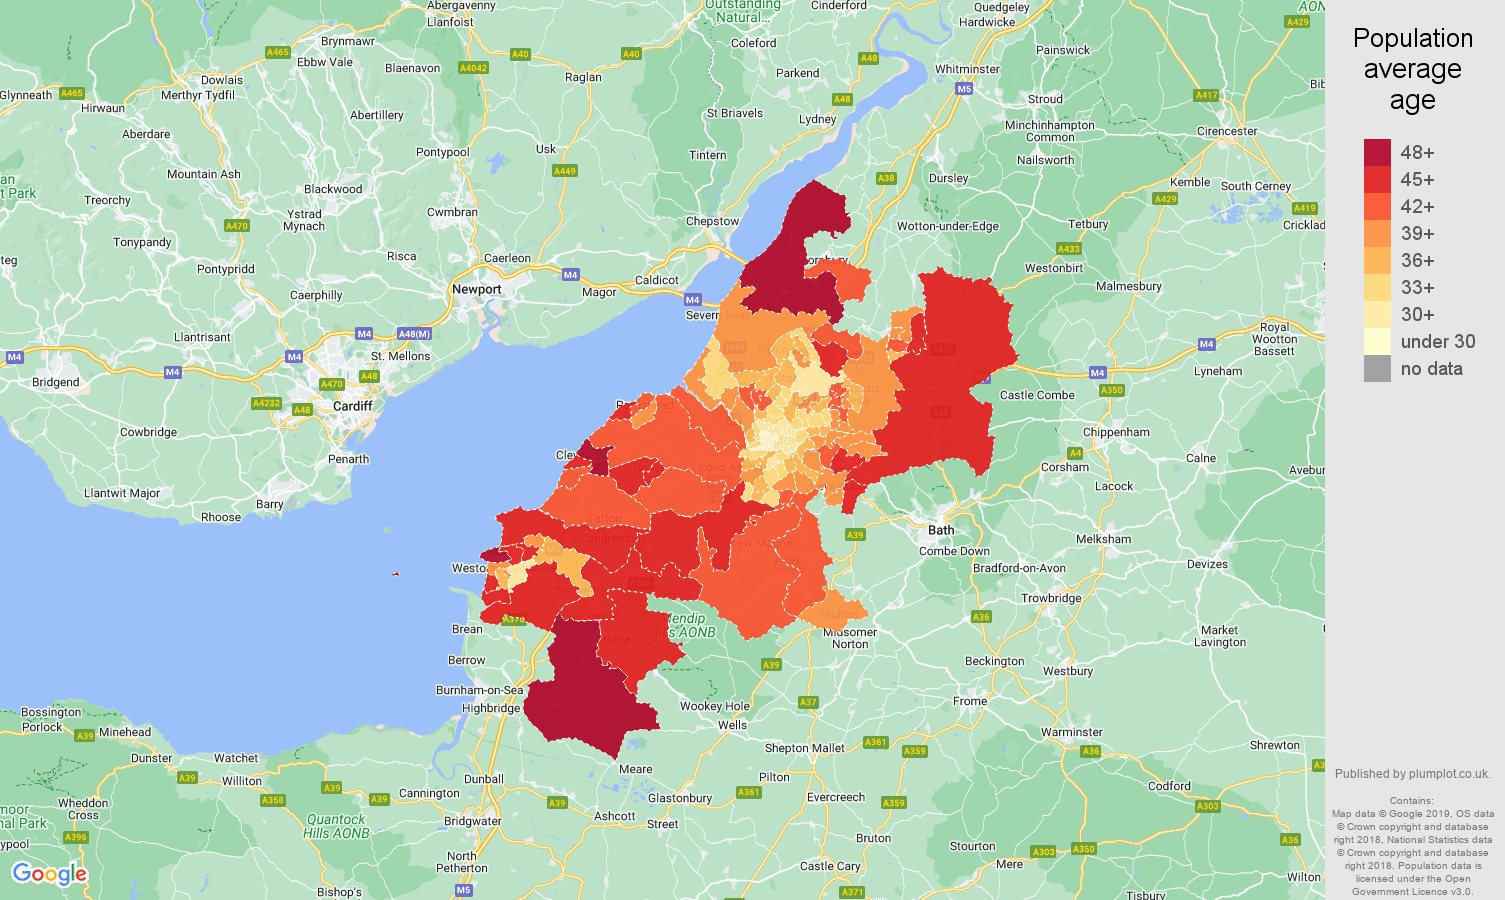 Bristol population stats in maps and graphs.